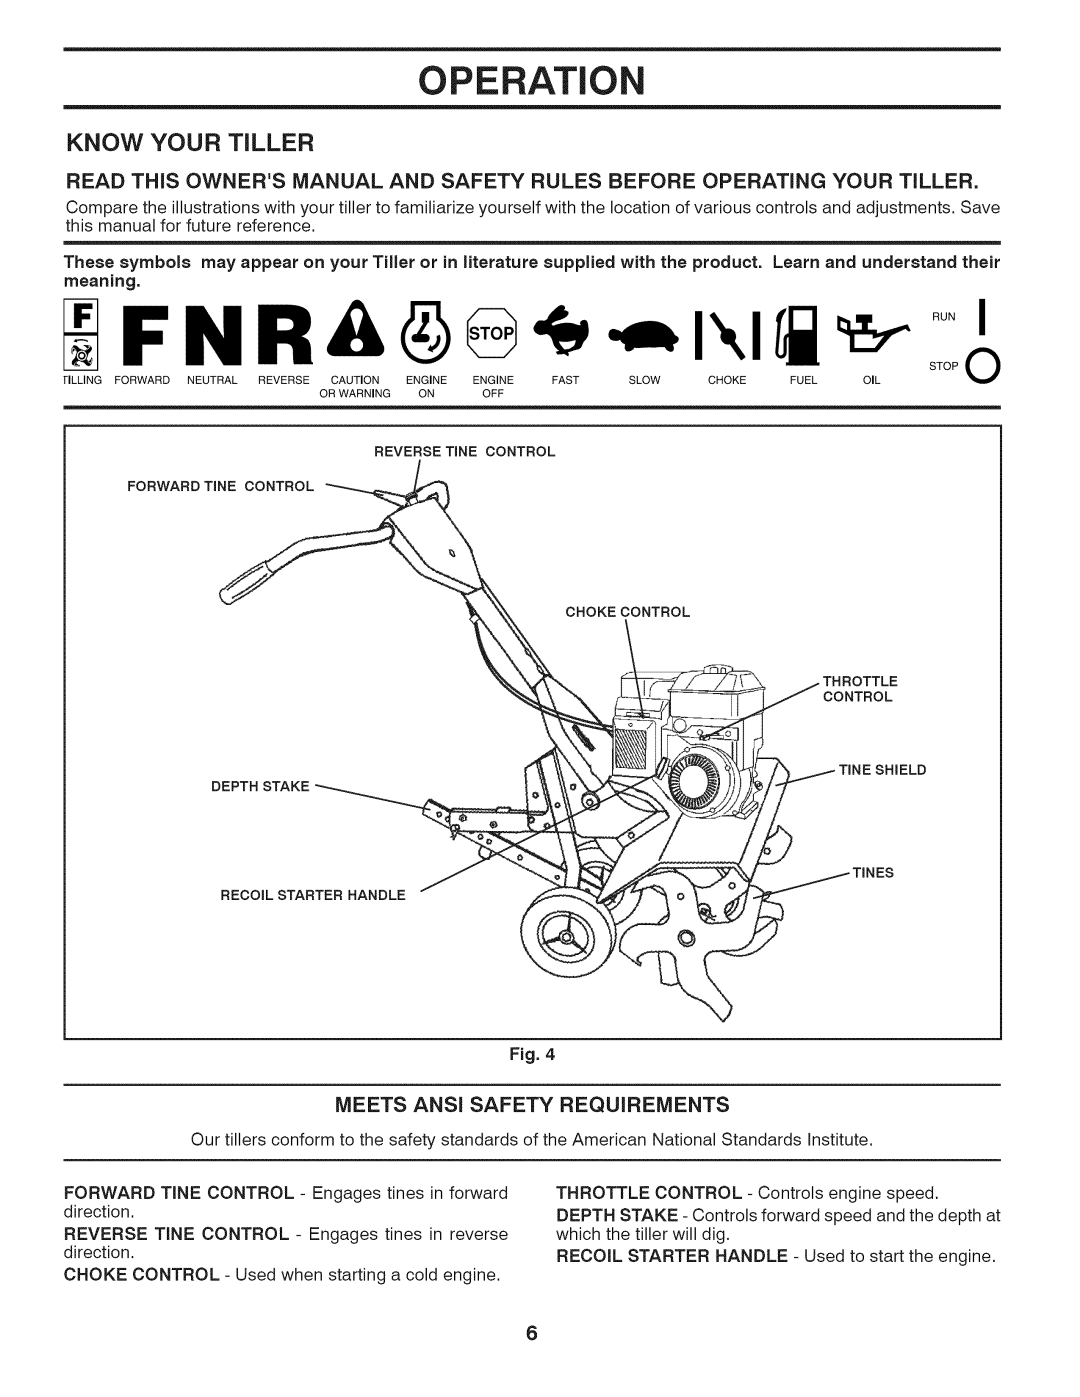 Husqvarna 917.29939 owner manual Operation, Know Your Tiller, Meets Ans! Safety Requirements, I,lrl 